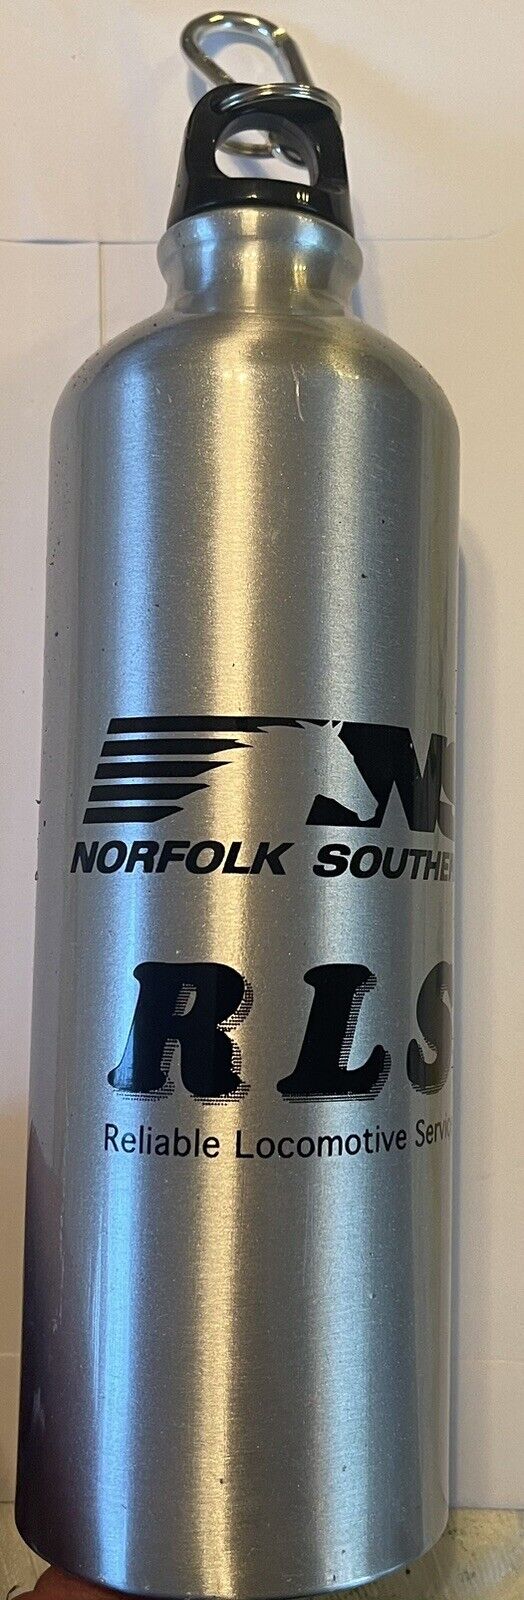 NEW NEVER USED NORFOLK SOUTHERN RAILROAD WATER BOTTLE NS TRAINS LOCOMOTIVE 41